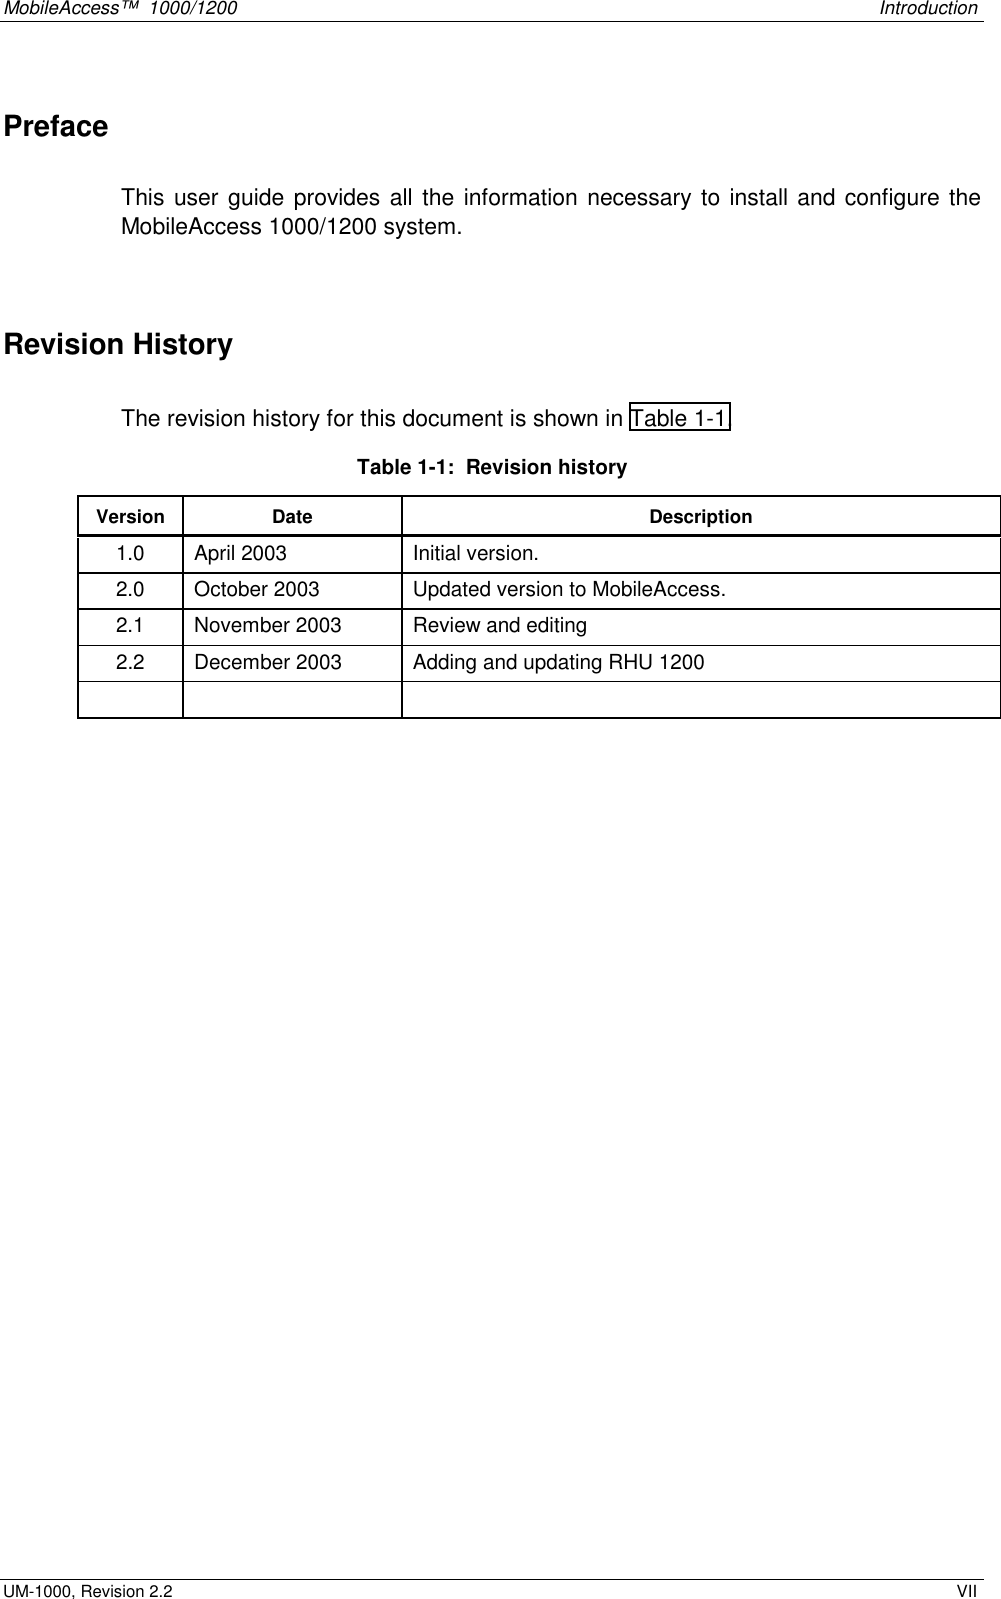 MobileAccess™  1000/1200    Introduction  UM-1000, Revision 2.2    VII Preface This user guide provides all the information necessary to install and configure the MobileAccess 1000/1200 system.   Revision History The revision history for this document is shown in Table  1-1. Table  1-1:  Revision history Version Date  Description 1.0  April 2003  Initial version. 2.0  October 2003  Updated version to MobileAccess. 2.1  November 2003  Review and editing 2.2  December 2003  Adding and updating RHU 1200       